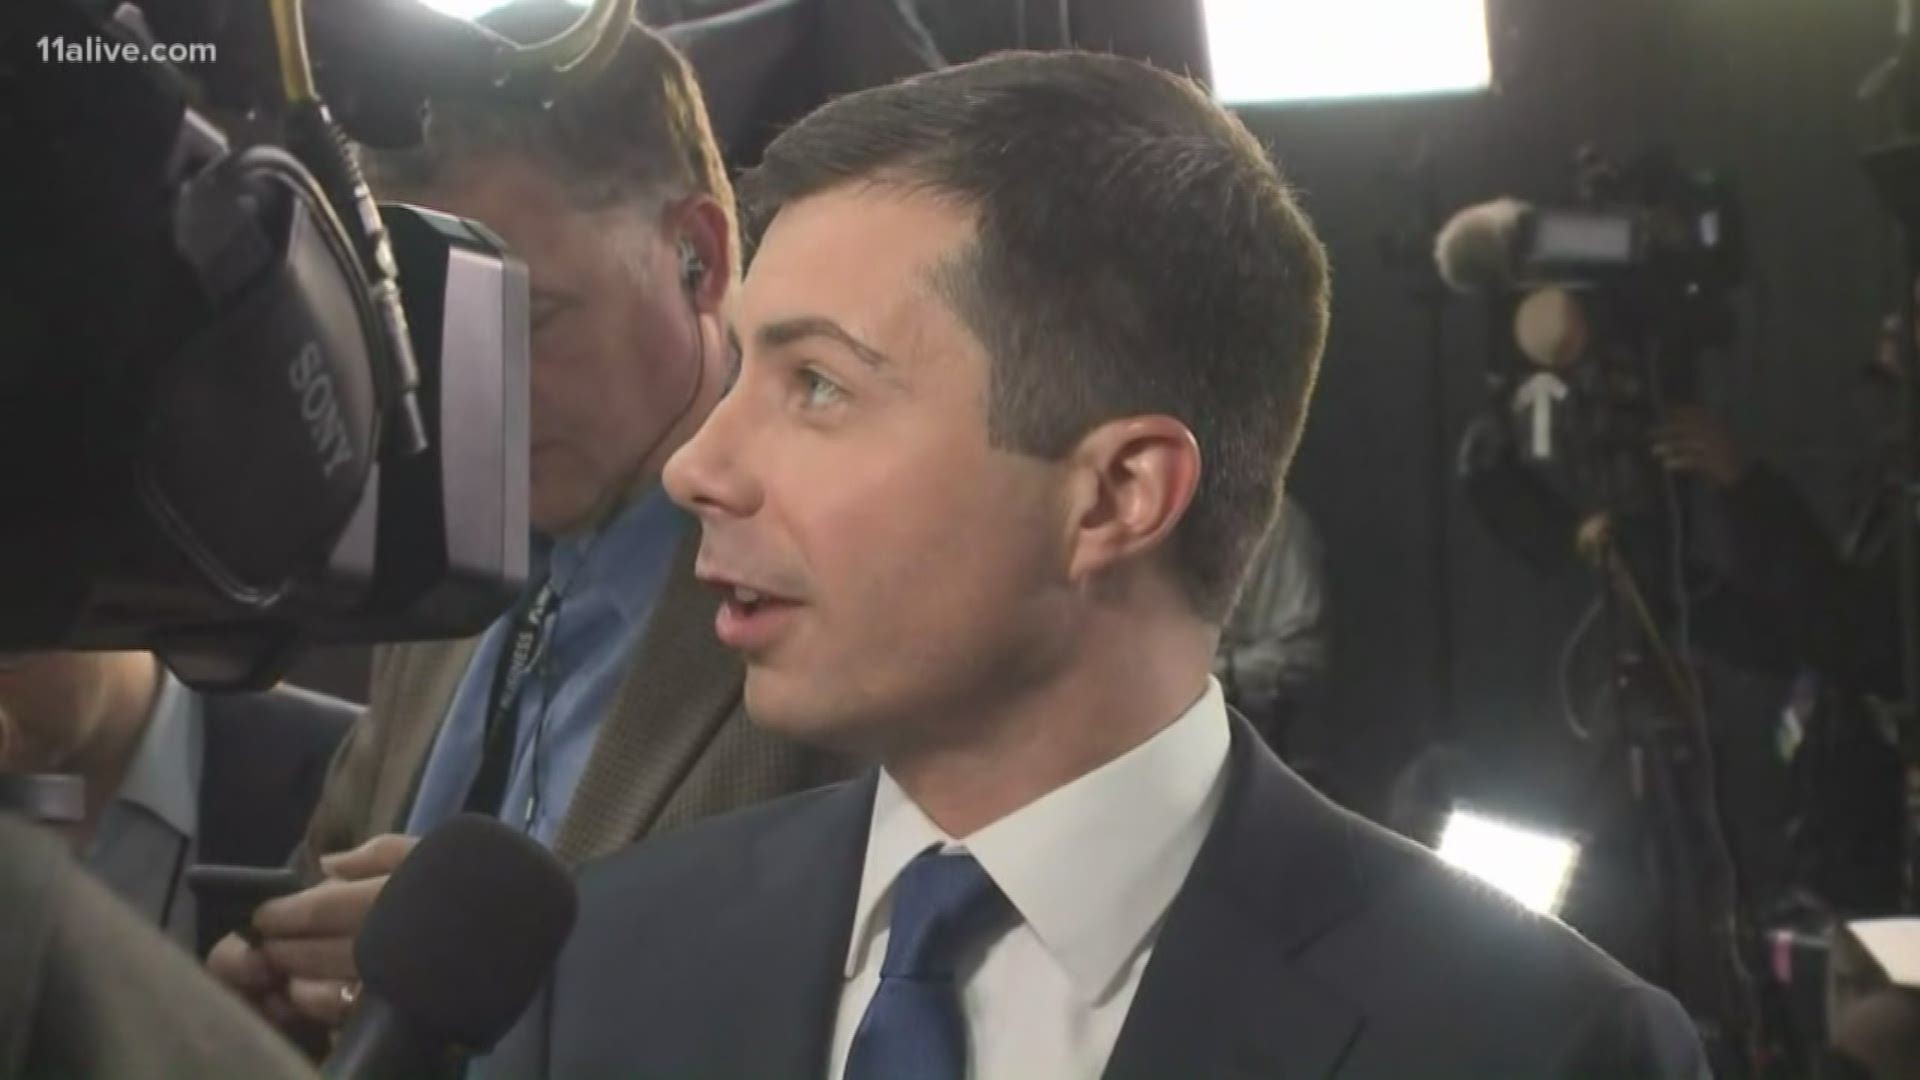 Democratic presidential candidate and South Bend, Indiana mayor Pete Buttigieg has dropped out of the race for president.